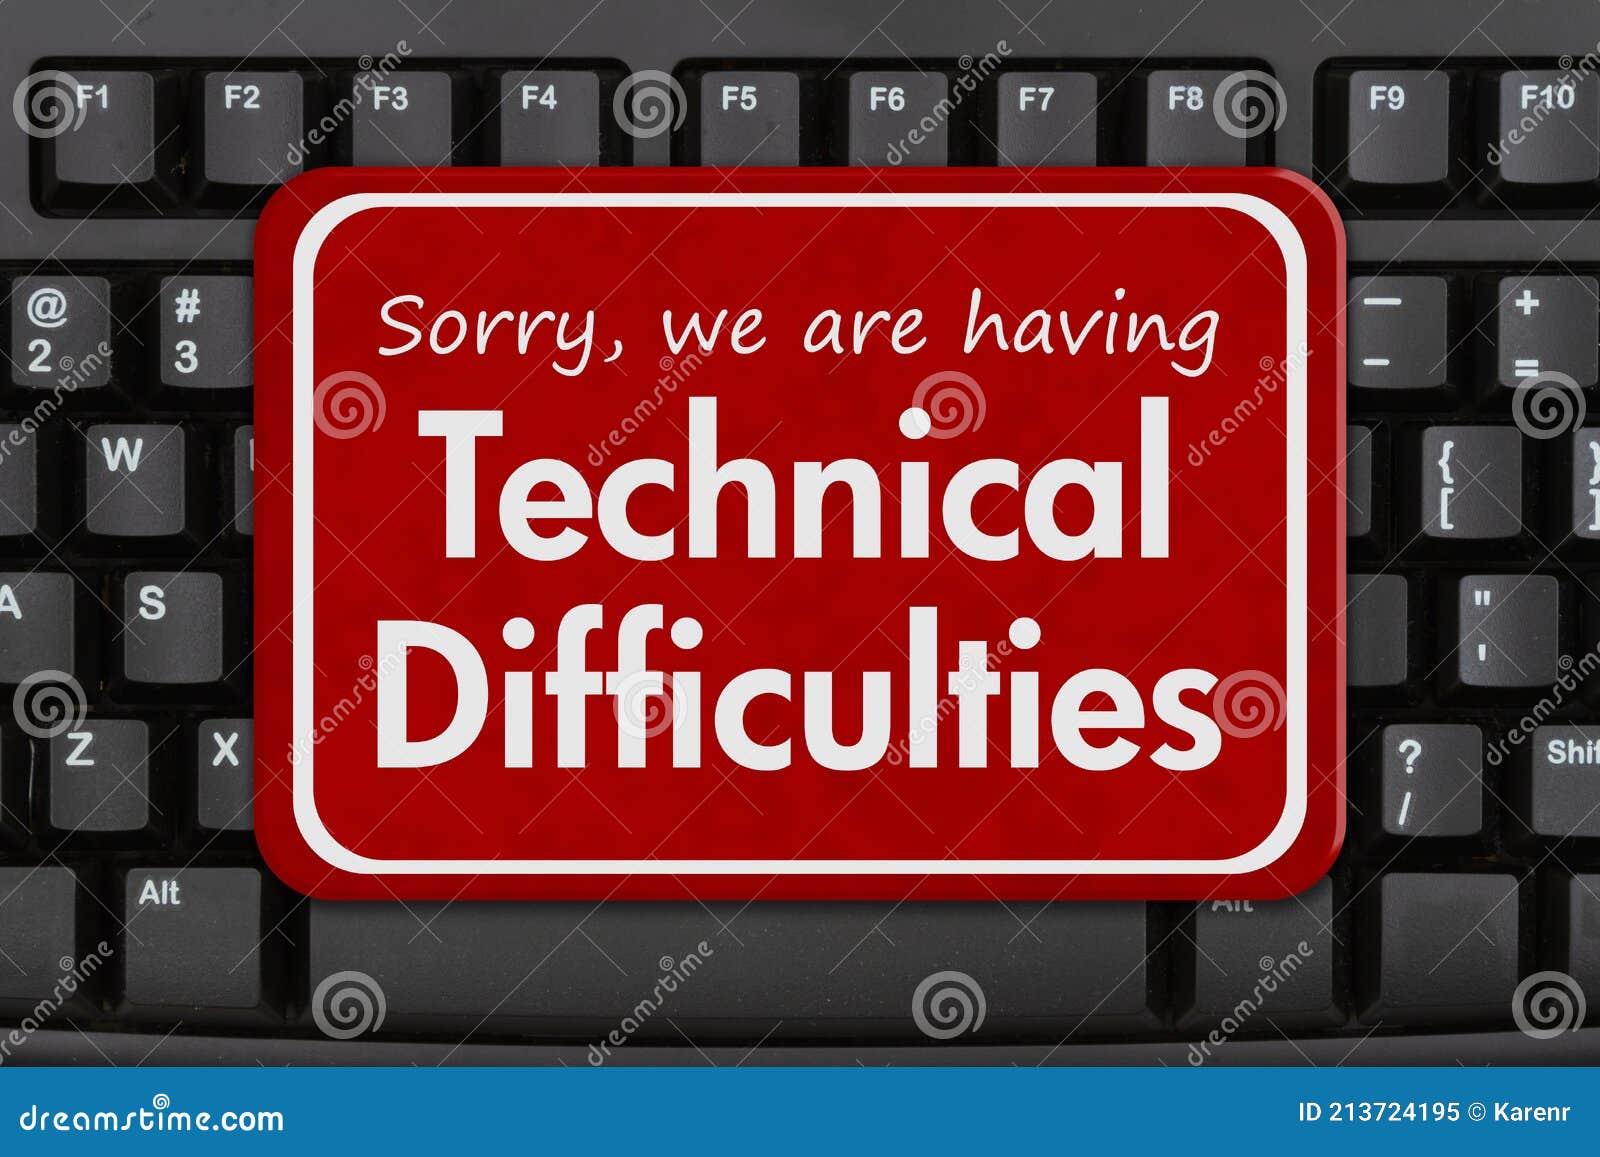 technical difficulties message on a black keyboard